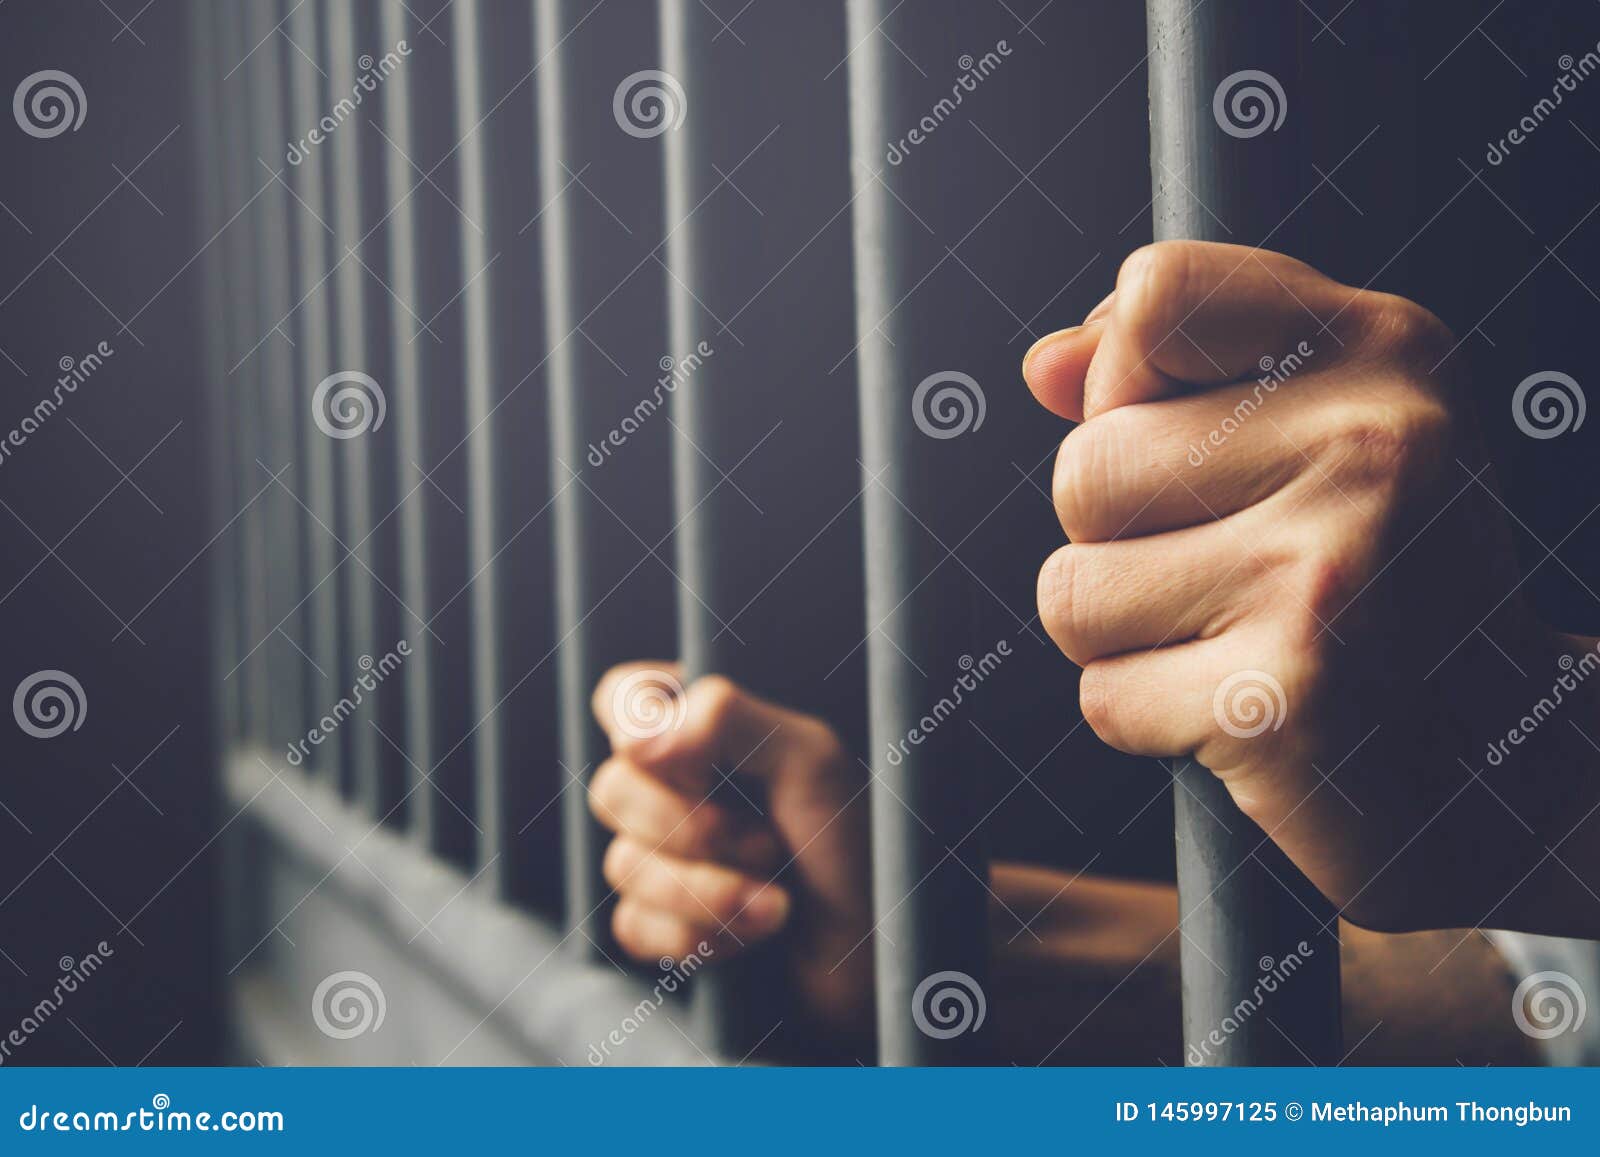 man in prison hands of behind hold steel cage jail bars.